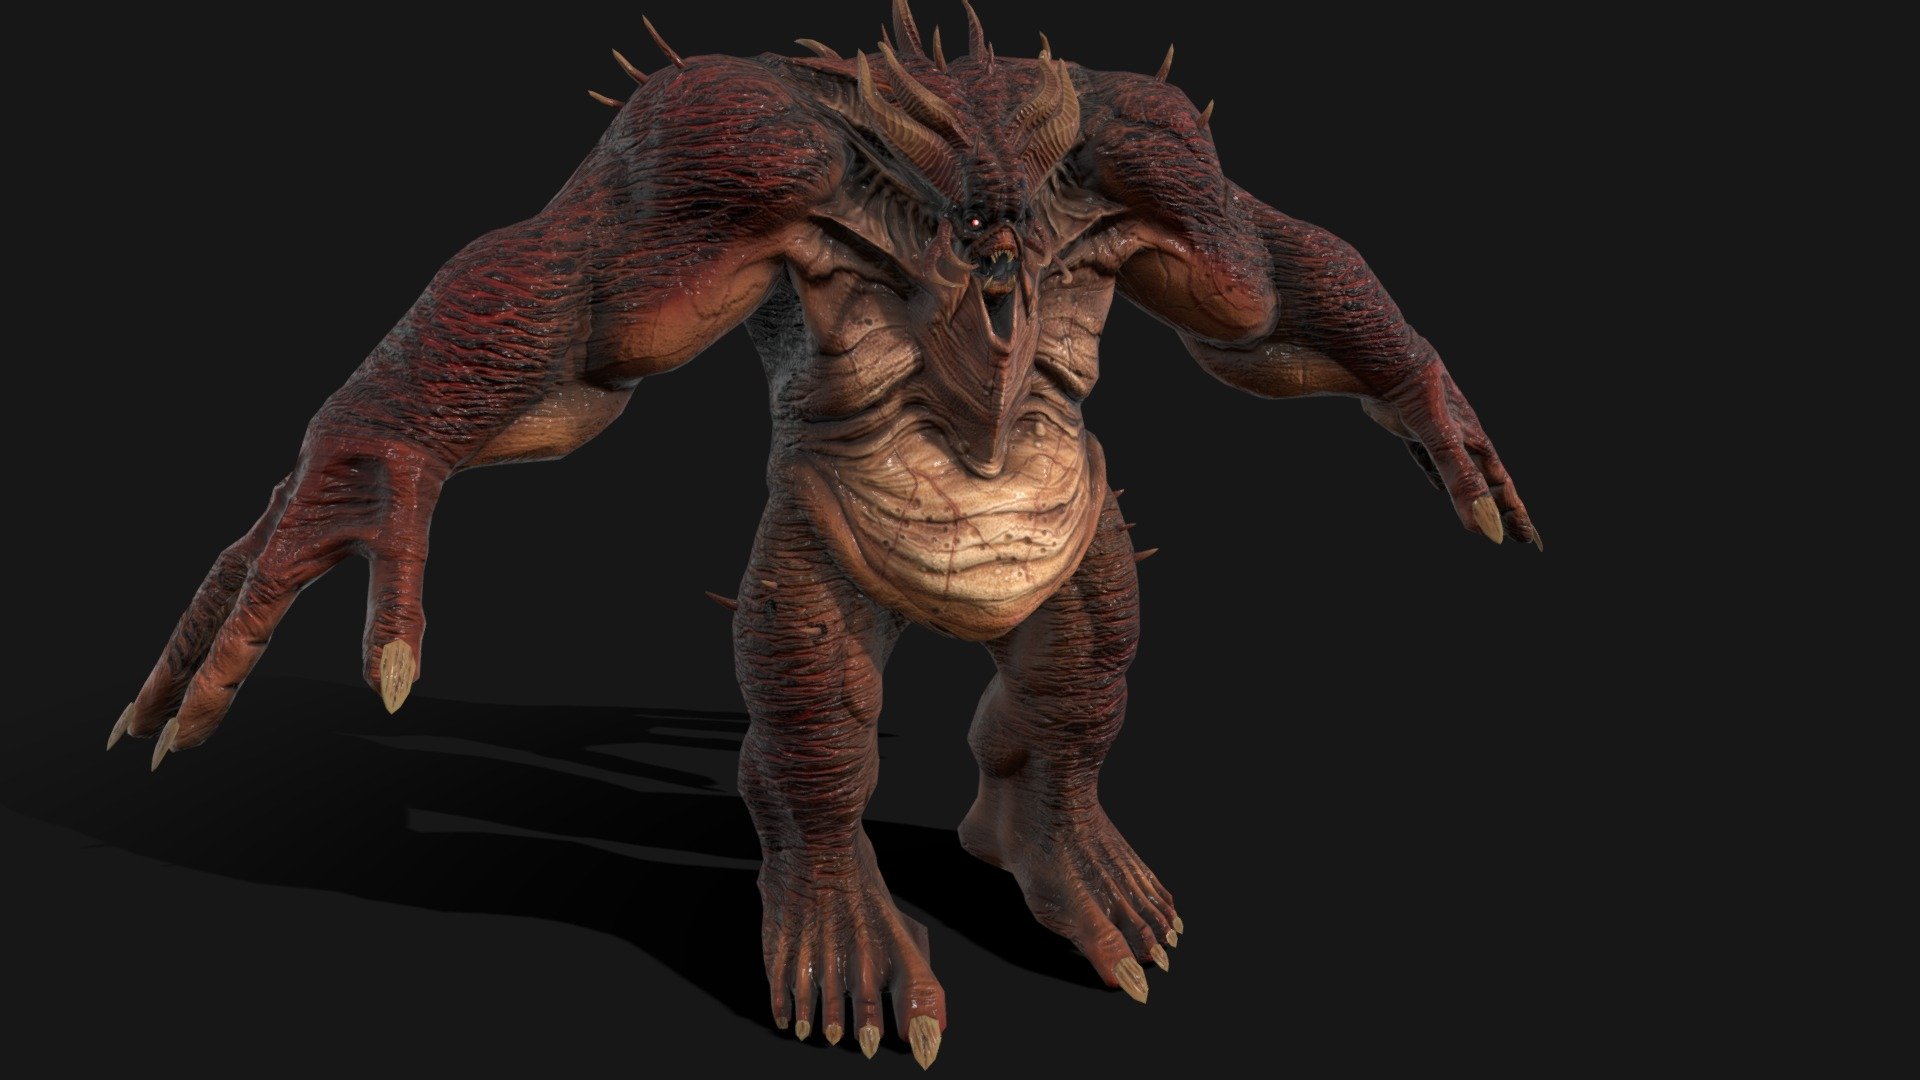 autor /Lyuda1981
Model: FatDemon2
preparation time 4 days

faces 7706
verts 7825
tris 14914

textures  res 4096x4096

Programs used

Sculpt ZBRUSH

Retopology and texturing
3DCOAT

UV map        UVLAYOUT

Animation and rigging
MAYA

Render
Marmoset toolbag - FatDemon2 - 3D model by dremorn 3d model